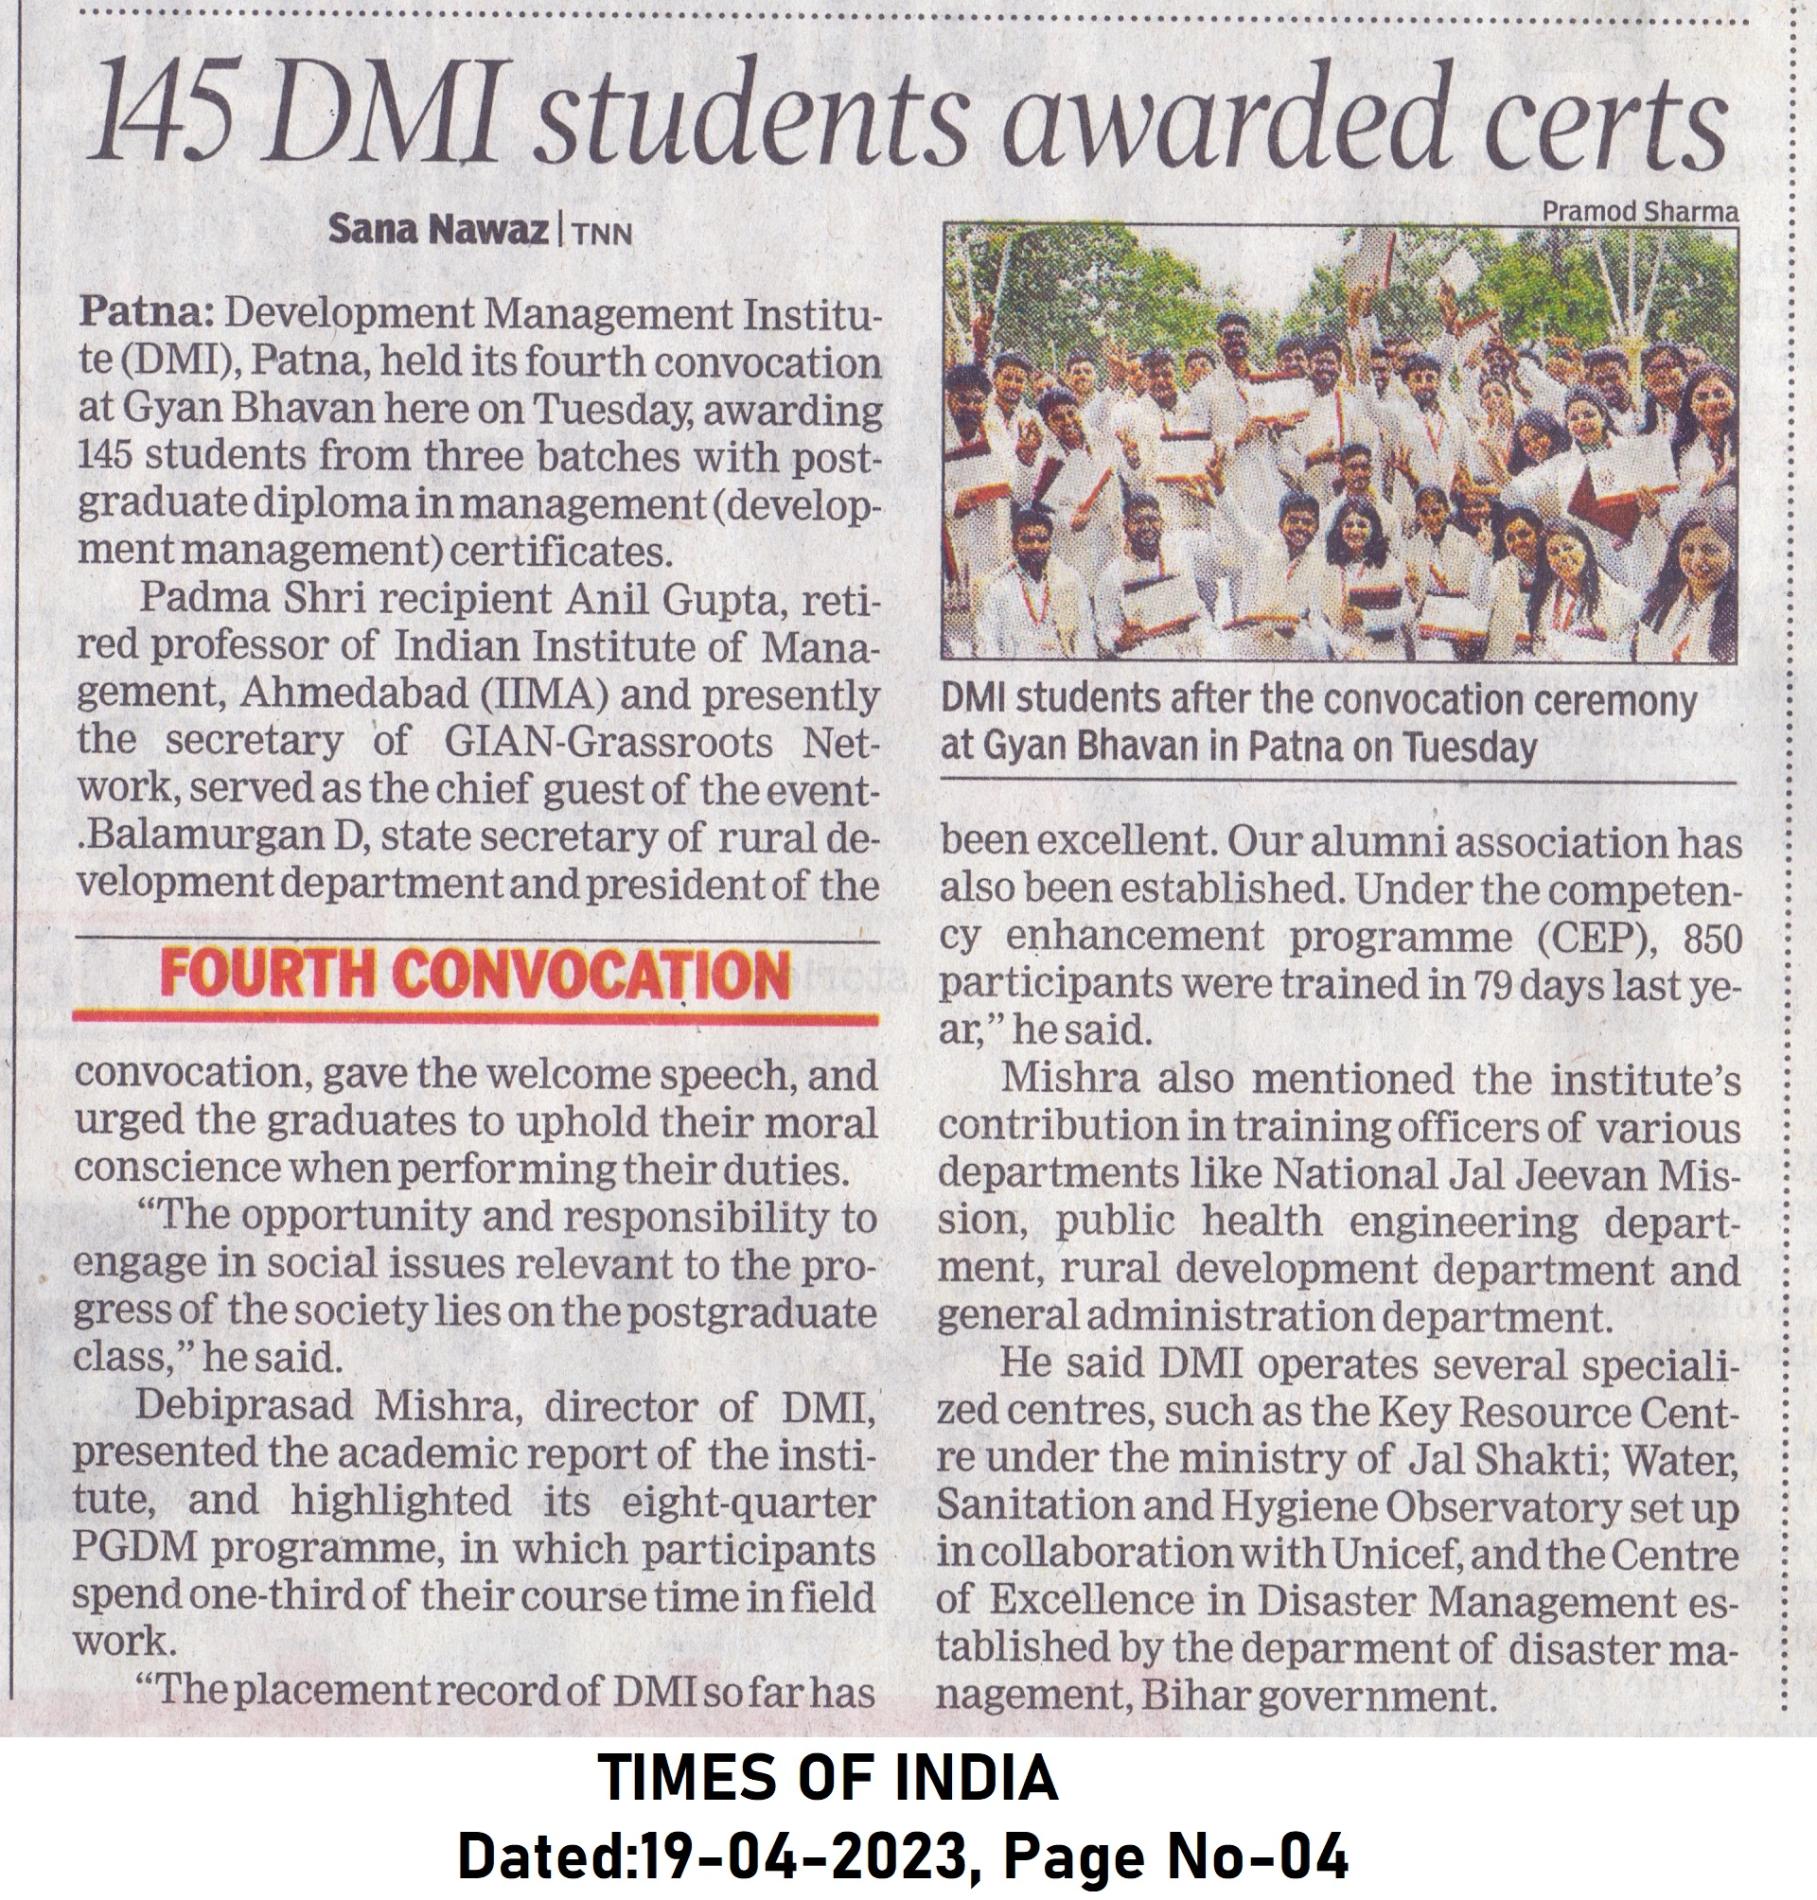 Times of India 19-04-2023, Page No-04.jpg